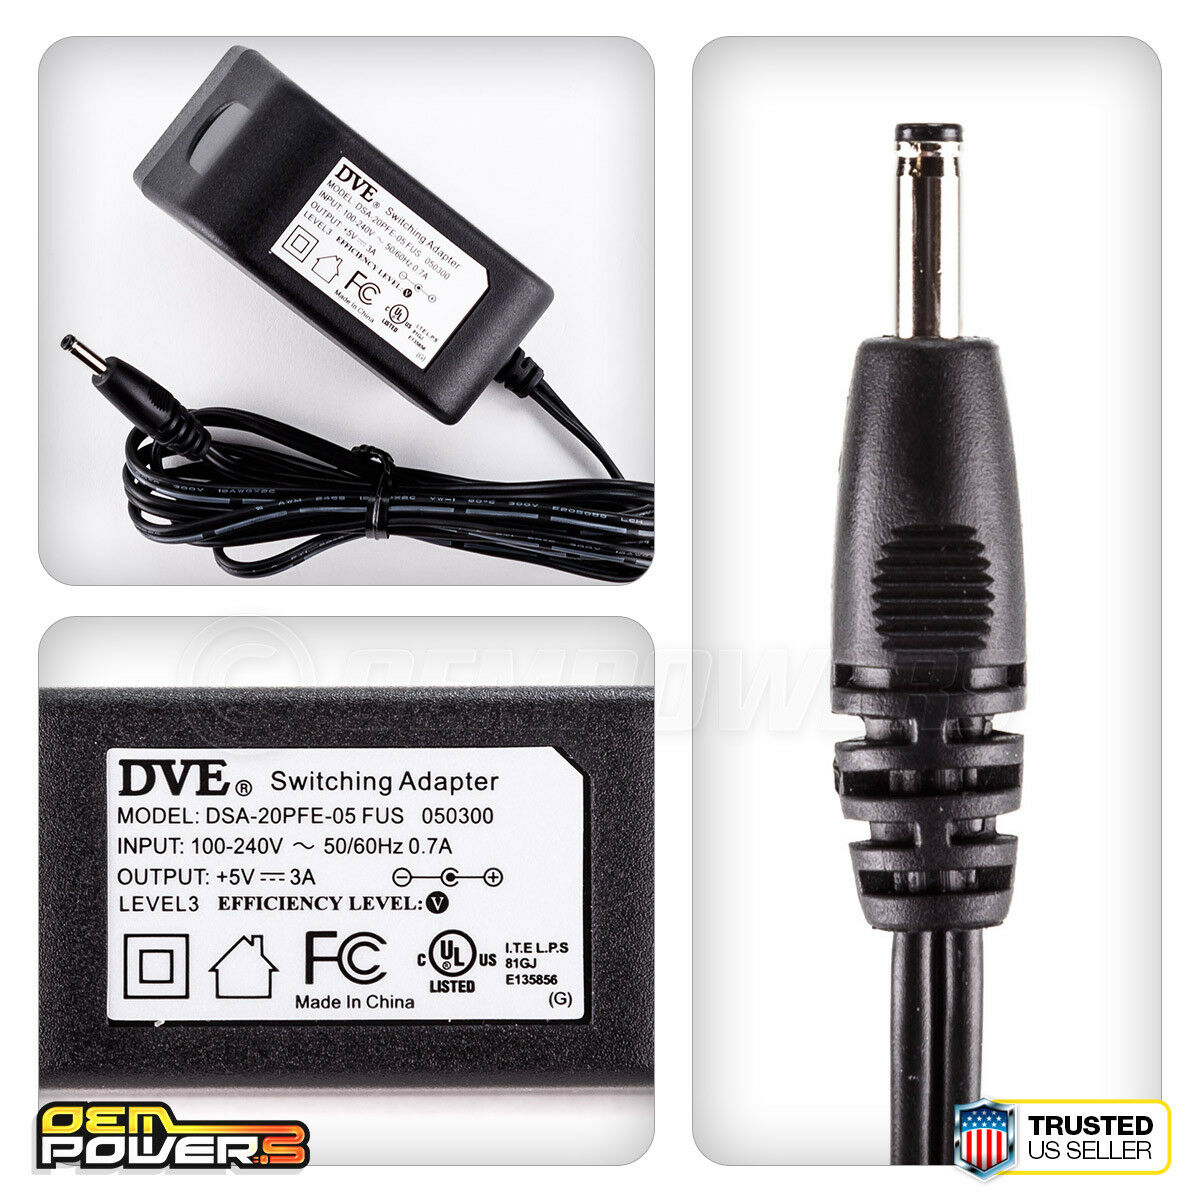 NEW GENUINE DVE DSA-20PFE-05 FUS 050300 5V 3A Switching AC Power Adapter Charger Brand: DVE Output Voltage: 5 V Ty